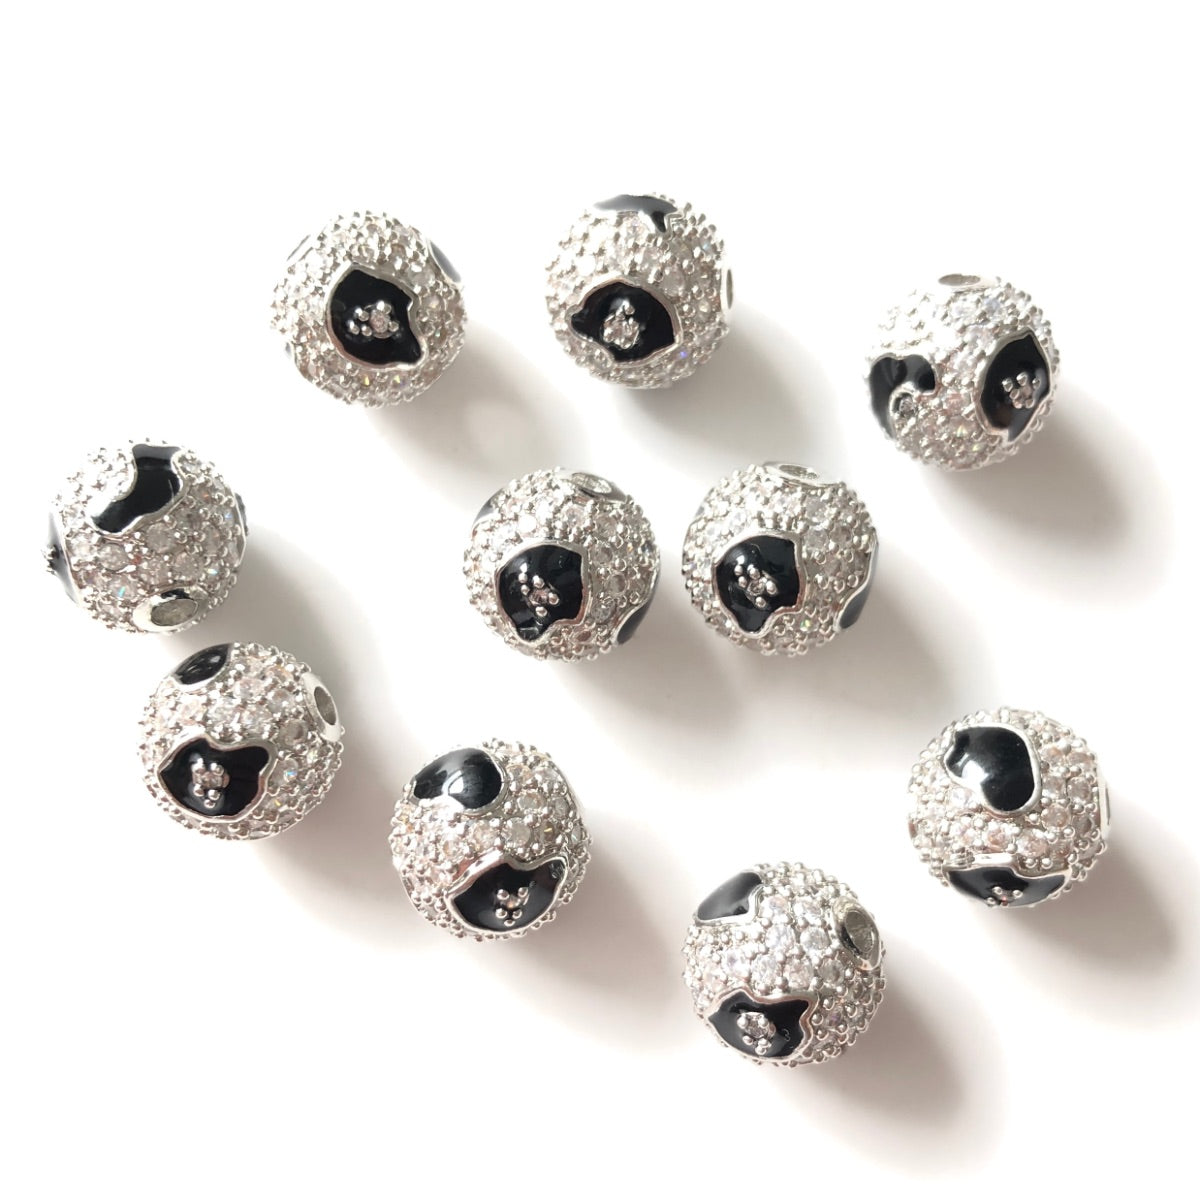 10-20-50pcs/lot 10mm Black Leopard Print Pattern CZ Paved Ball Spacers Beads Silver CZ Paved Spacers 10mm Beads Ball Beads Leopard Printed New Spacers Arrivals Charms Beads Beyond